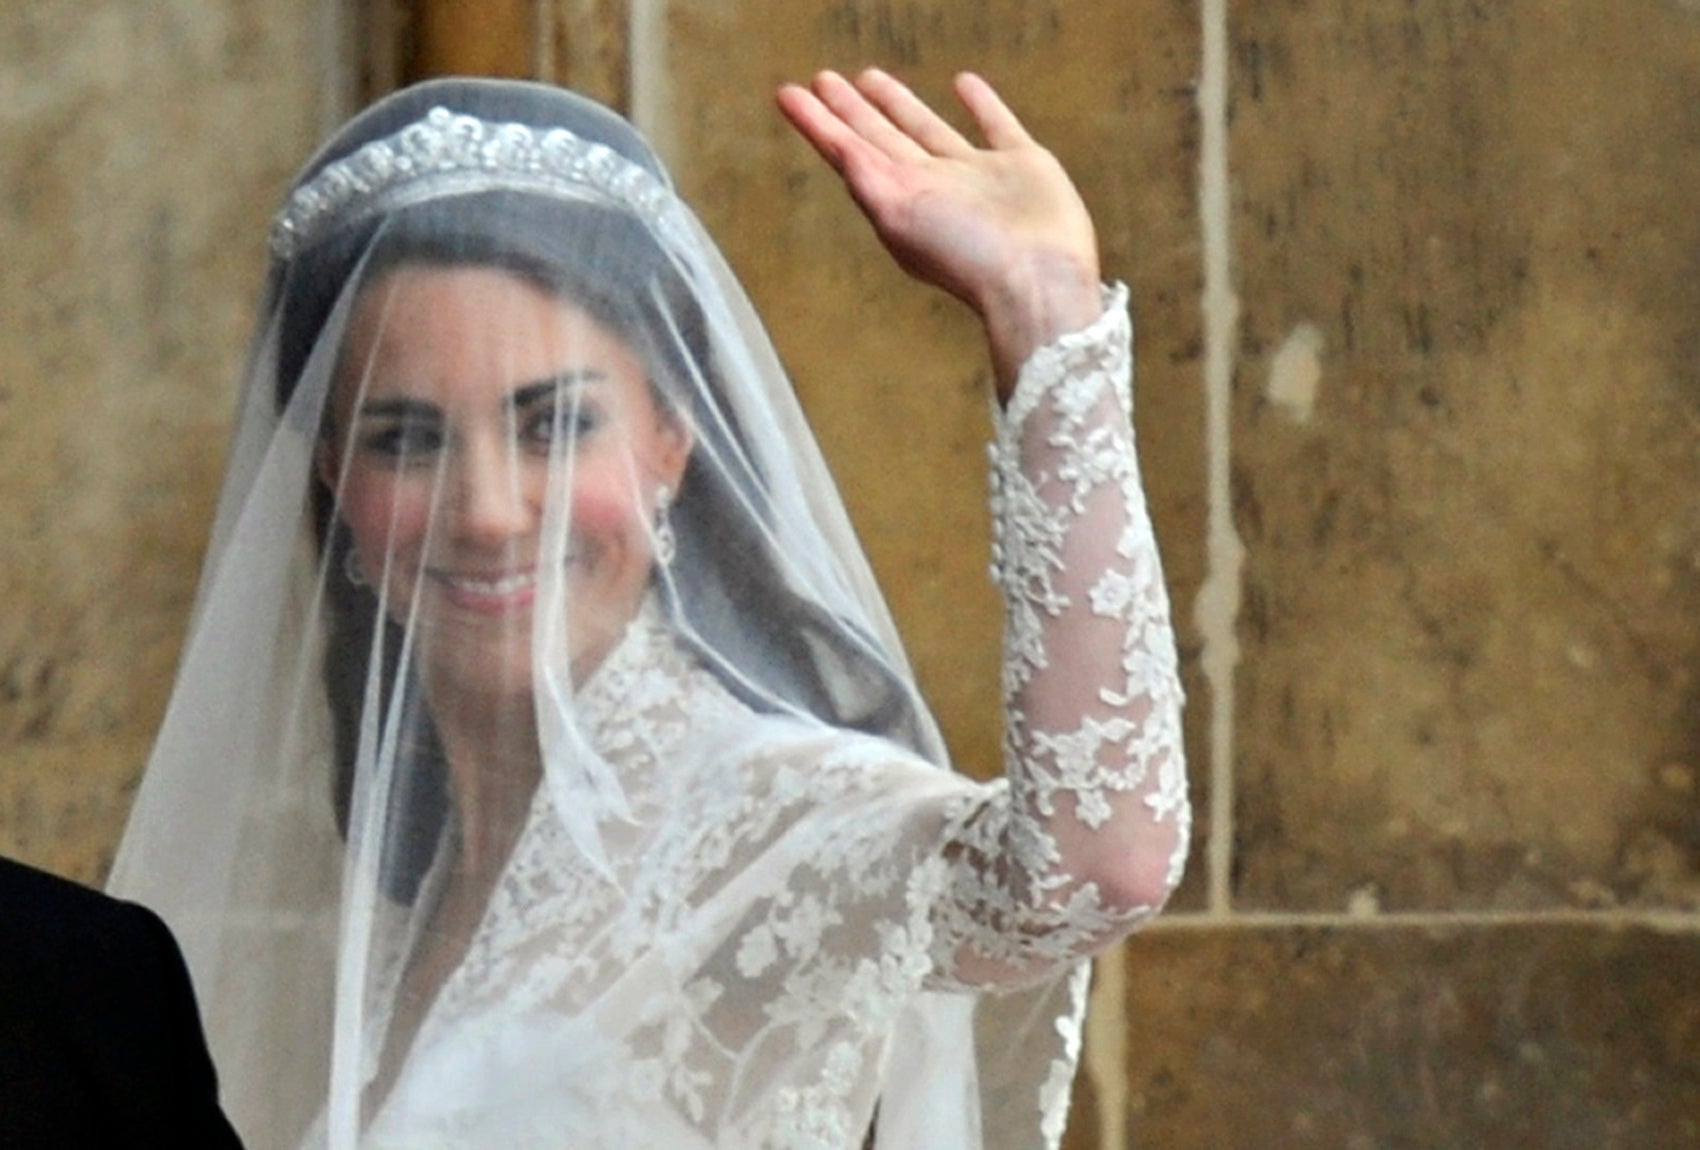 Kate wore her first tiara on her wedding day